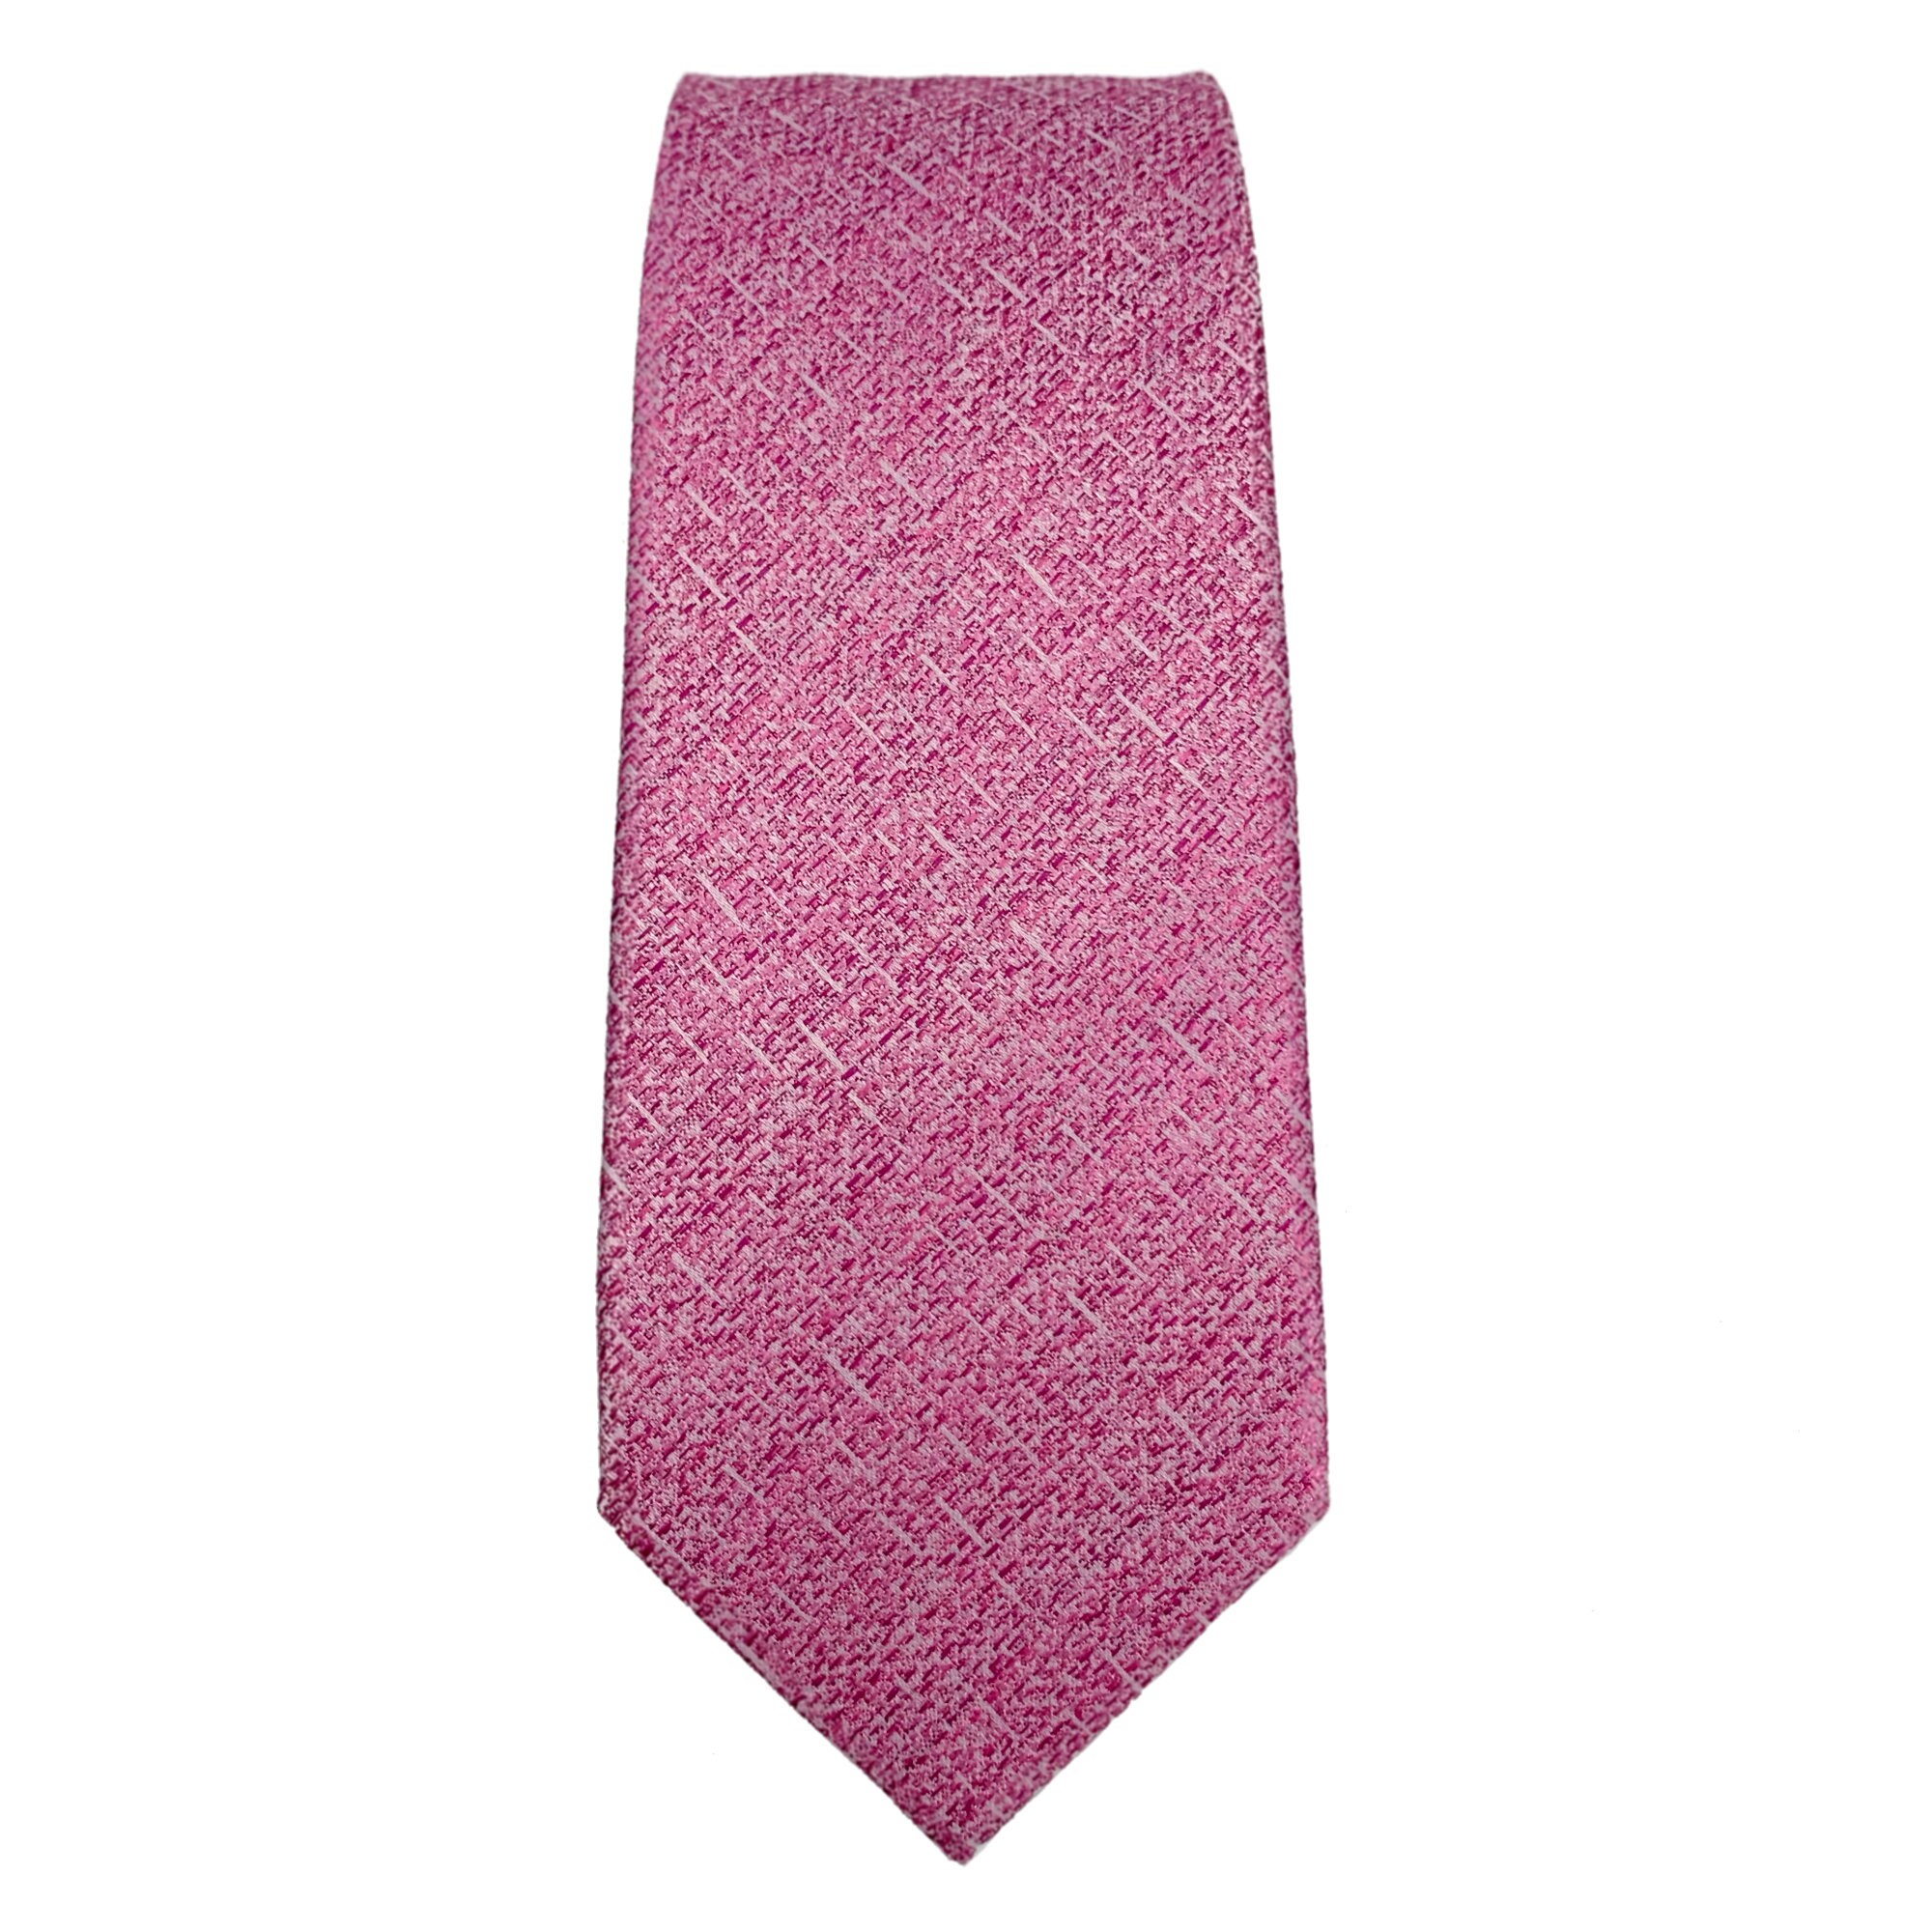 Pink, White and Purple Mixed Striped Tie 3.15 8cm - Etsy